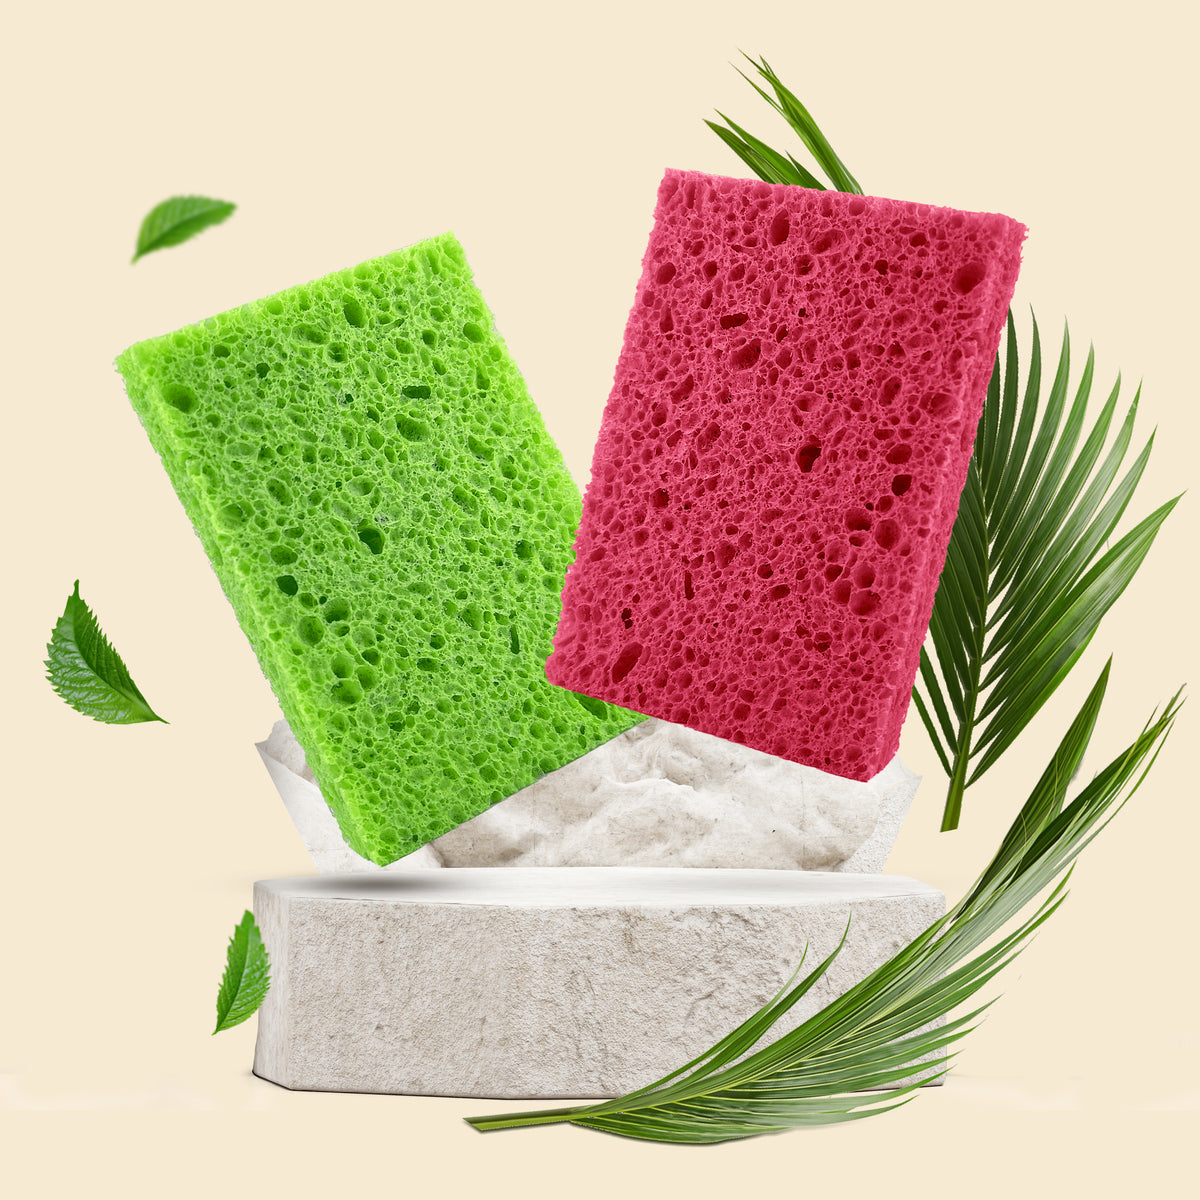 Biodegradable &amp; Compostable Cellulose Compressed Sponges - Pack of 12 (Rectangular)